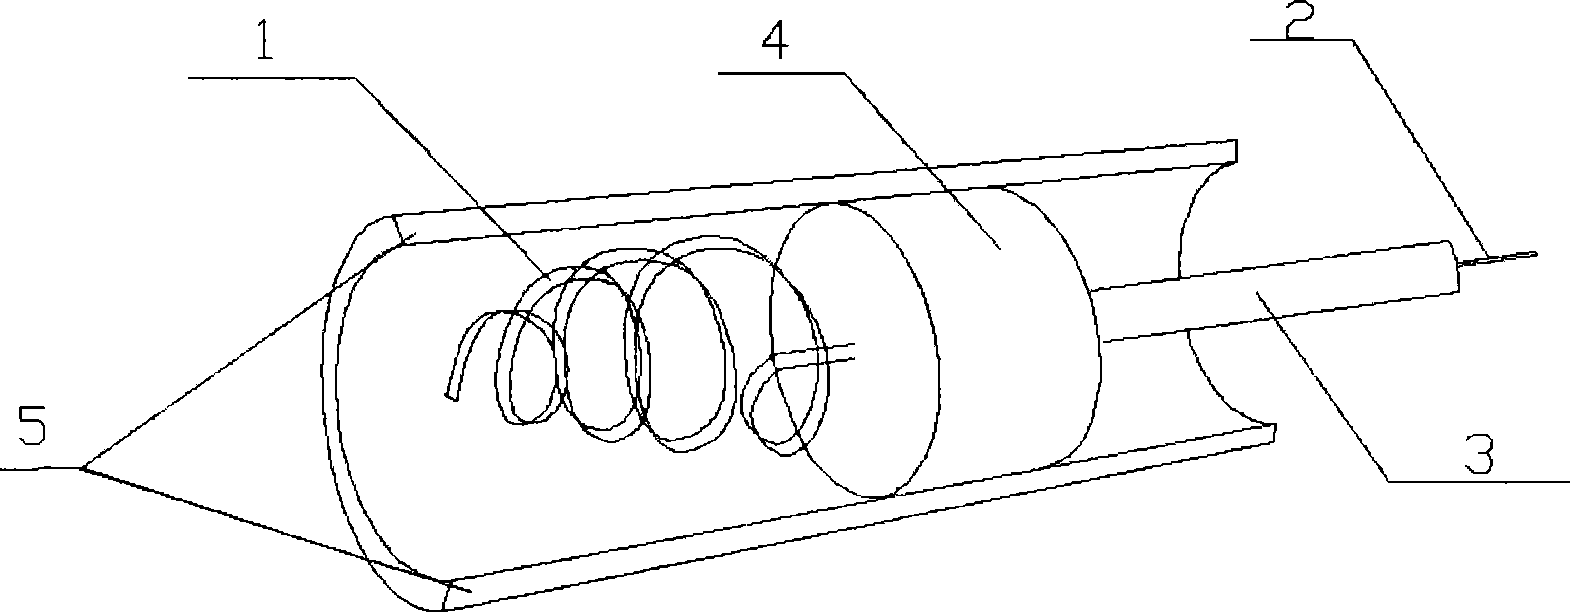 Novel thrombus cleaning device